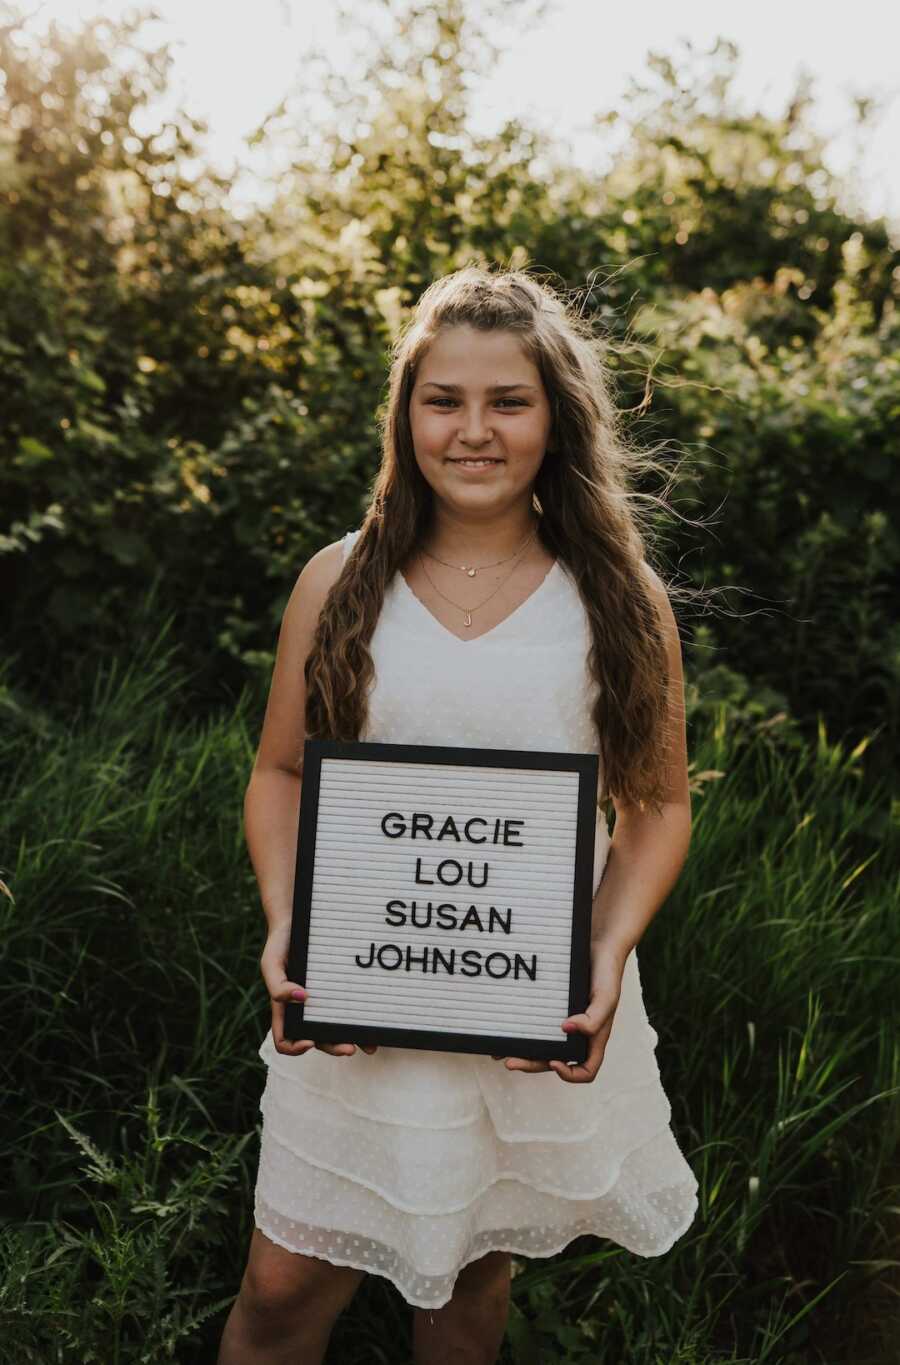 Adopted daughter stands holding a letter sign